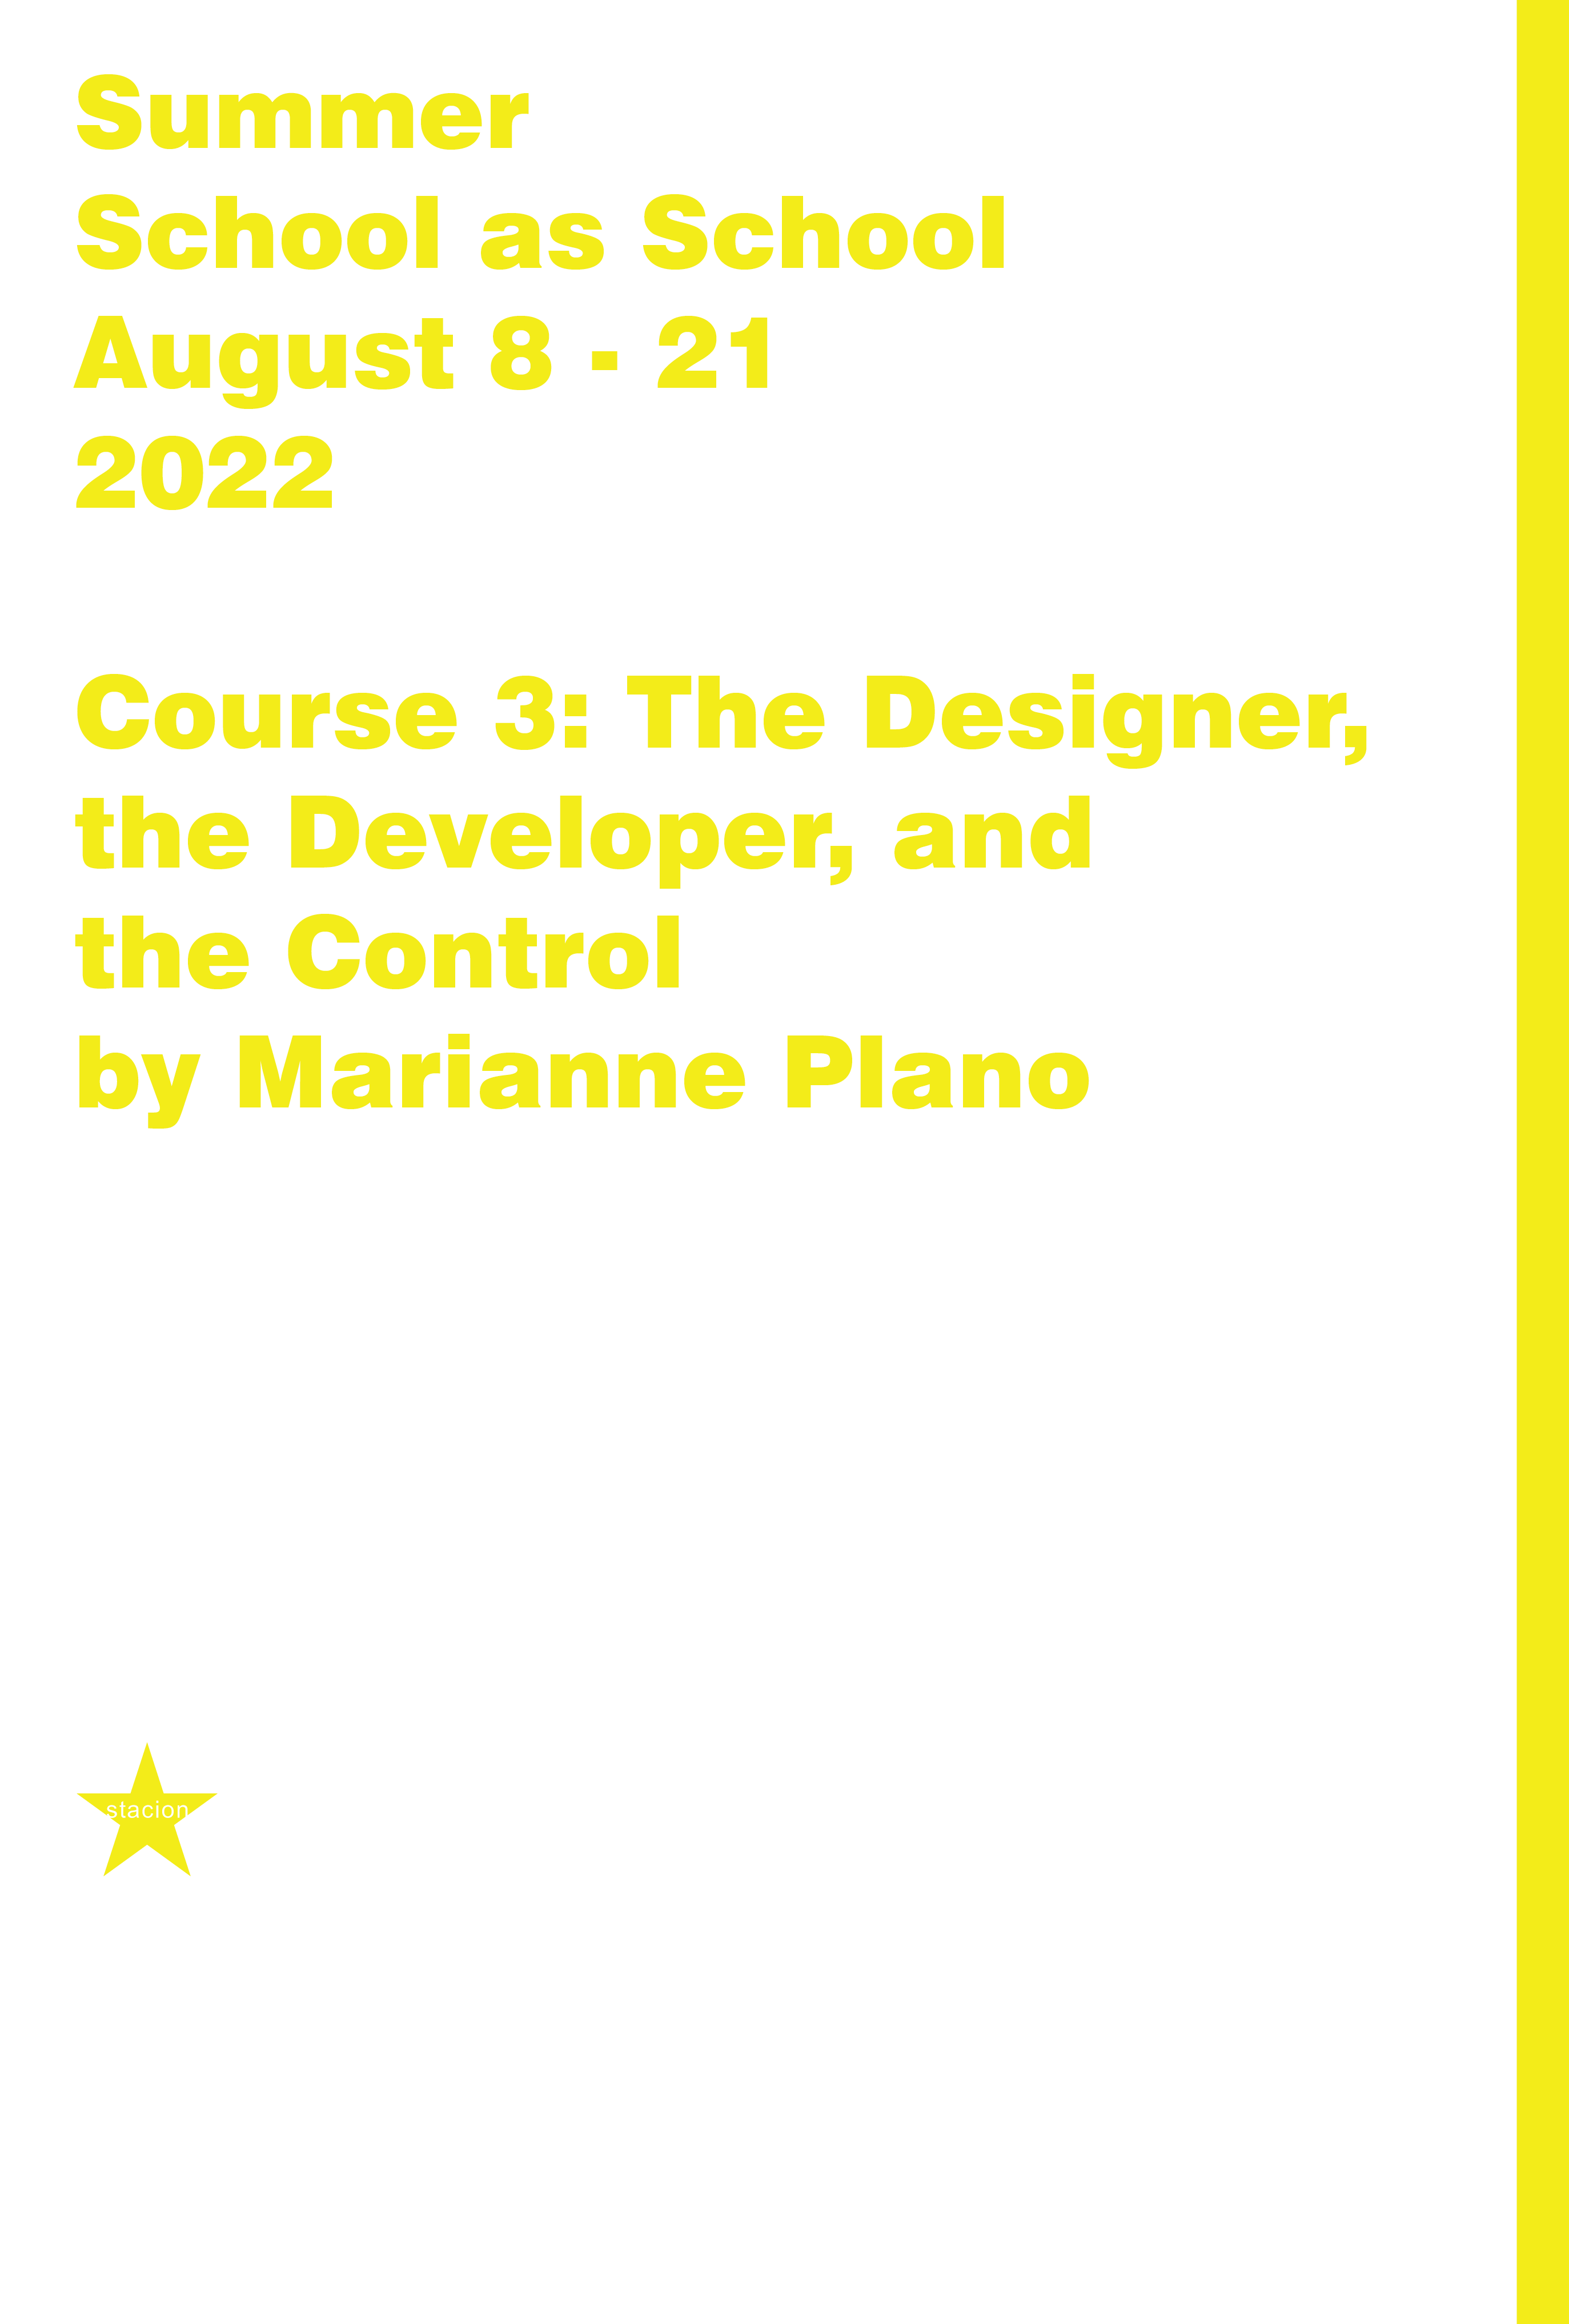 Course 3: The Designer, the Developer, and the Control